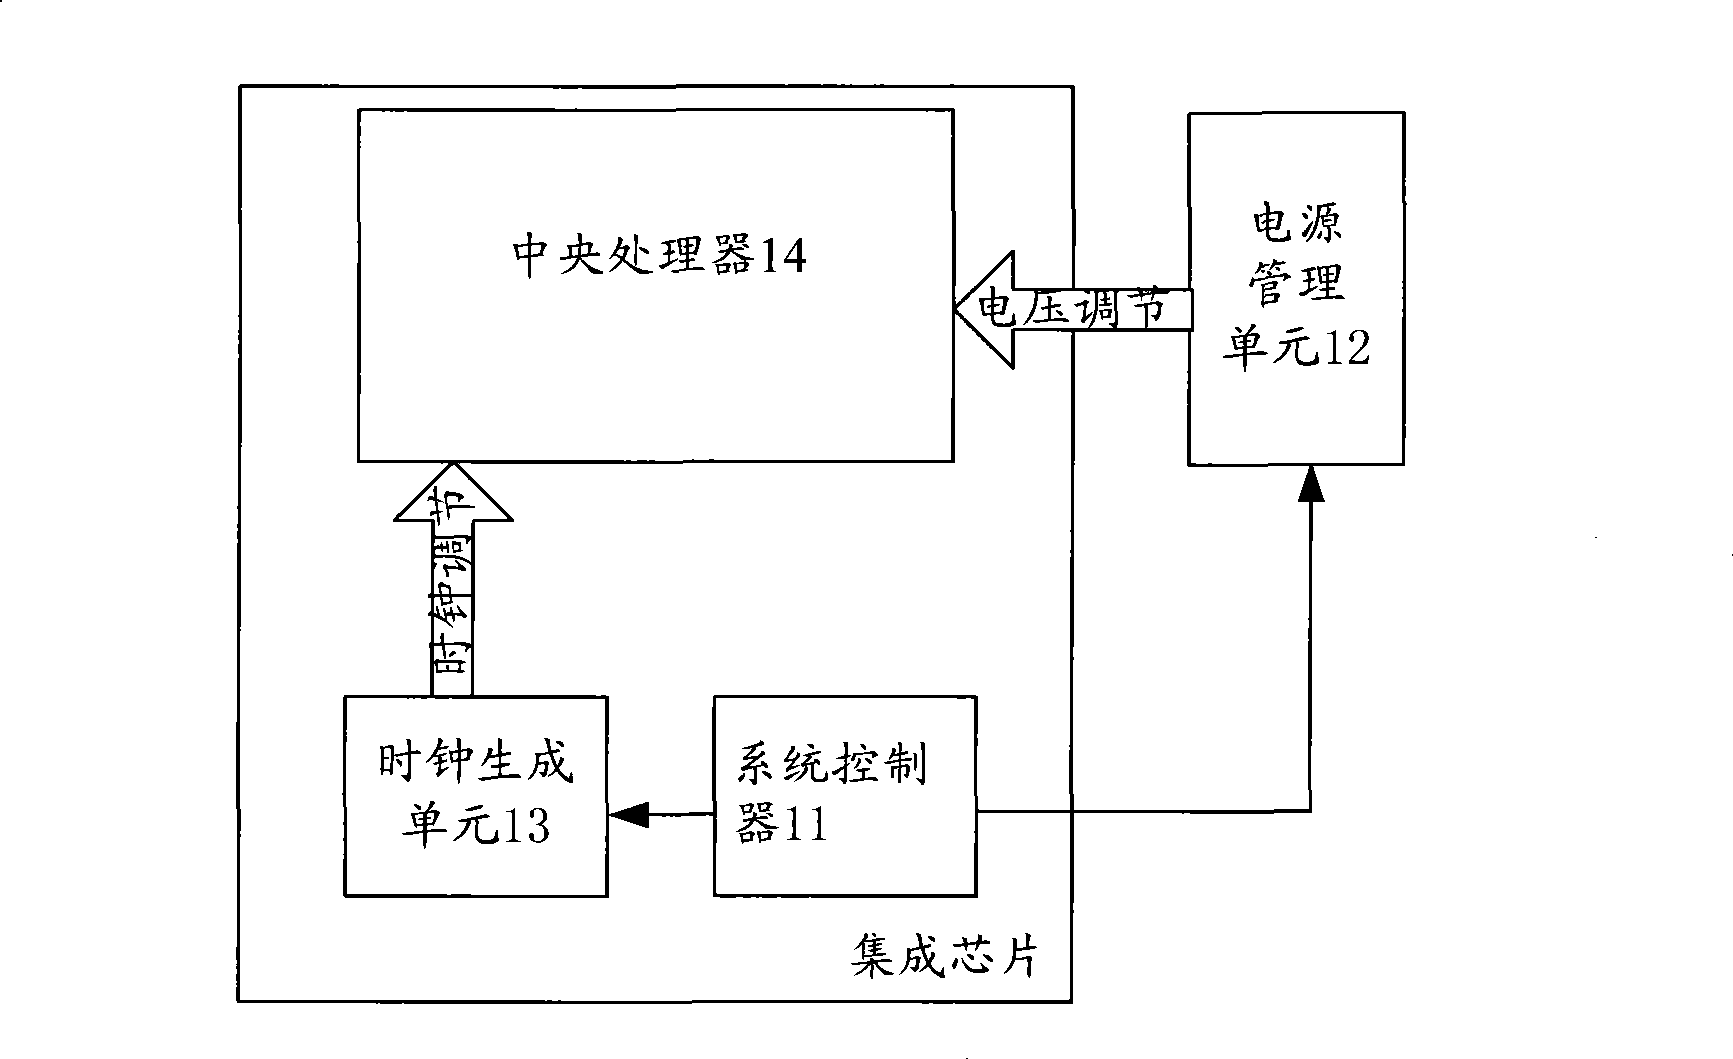 Method and system for regulating CPU clock frequency